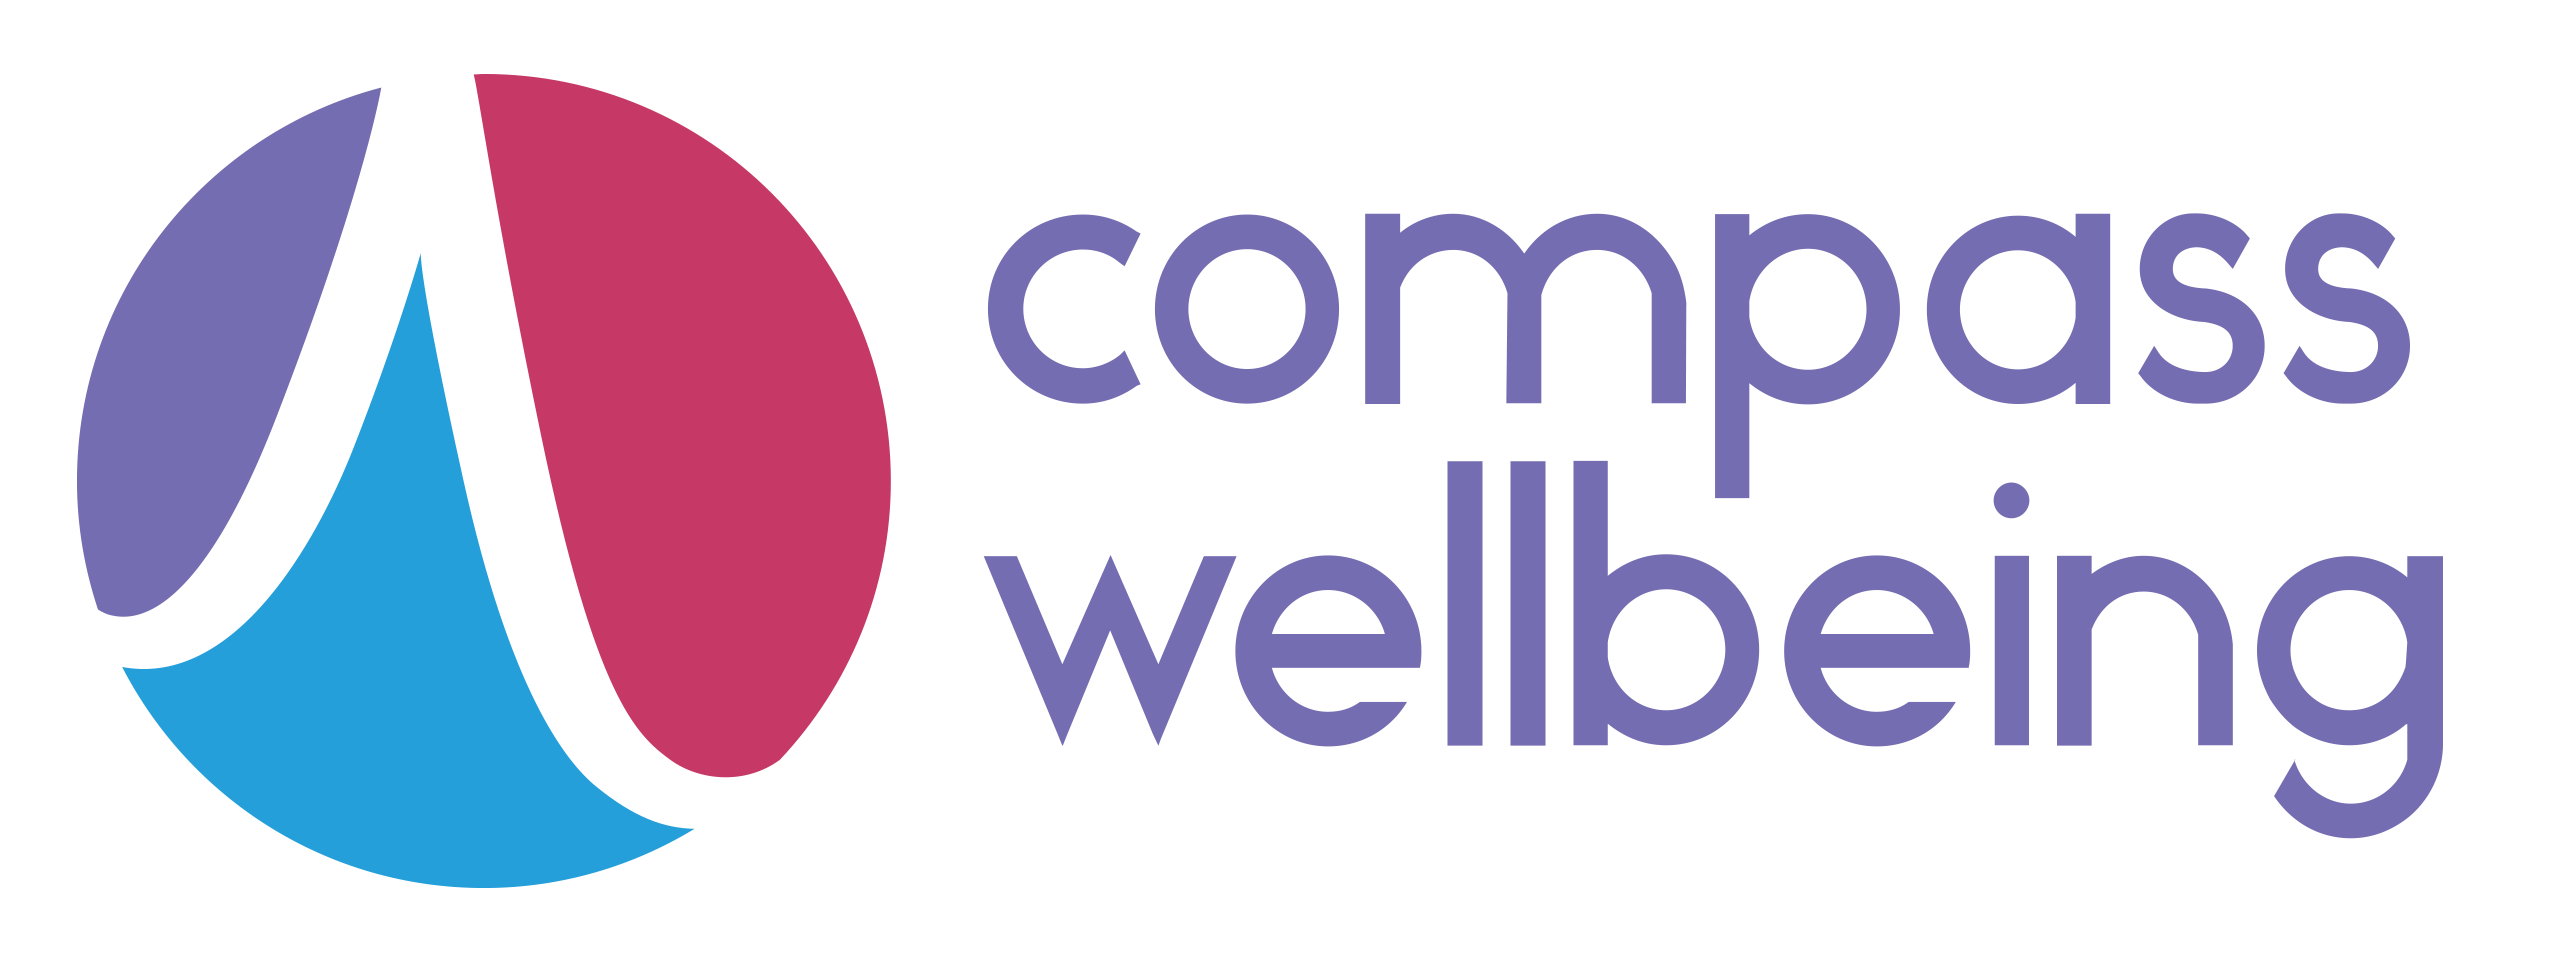 Compass Wellbeing